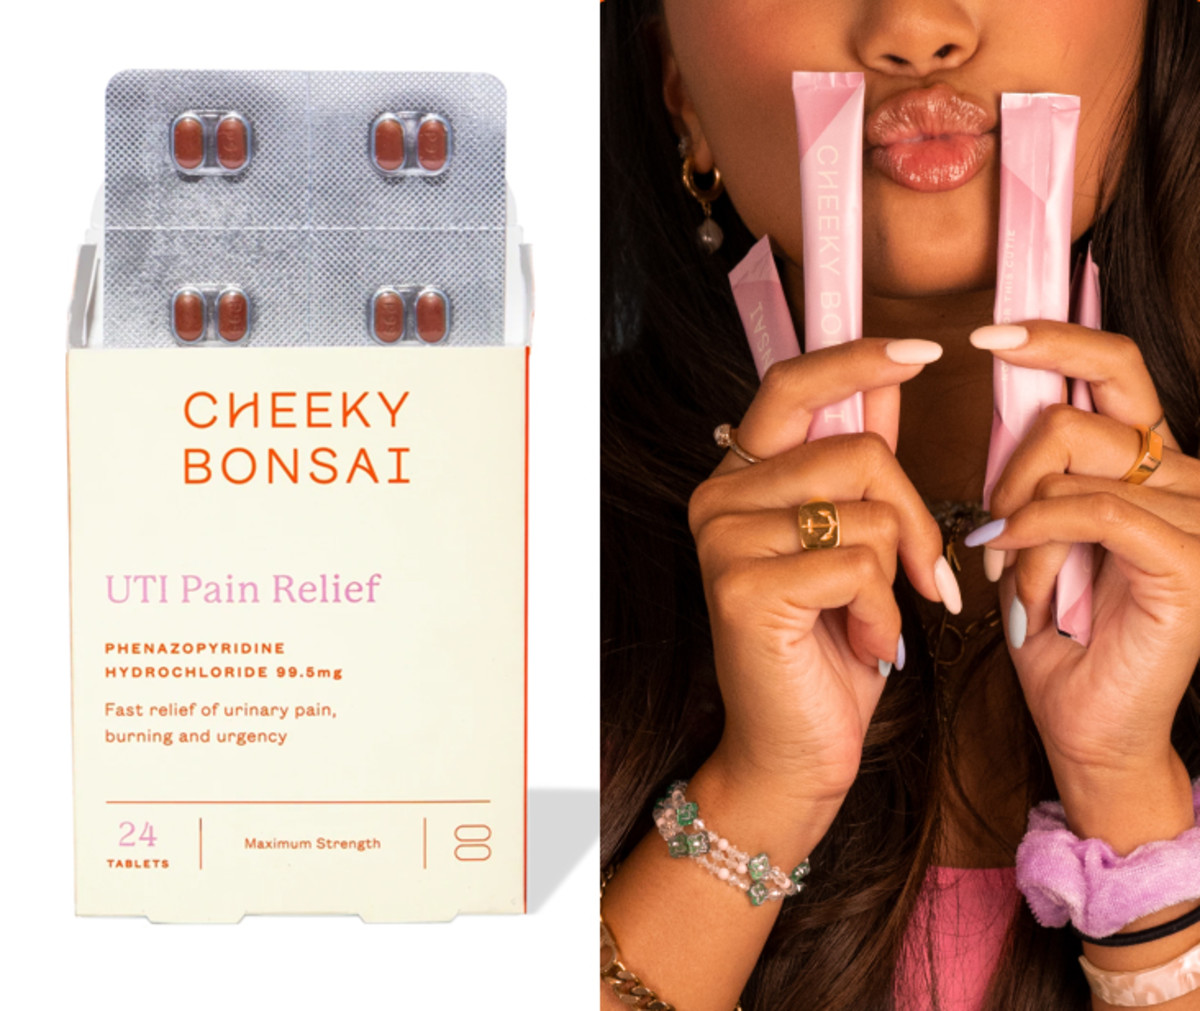 Cheeky Bonsai UTI Pain Relief and UTI Drink Mix support a healthy urinary tract.